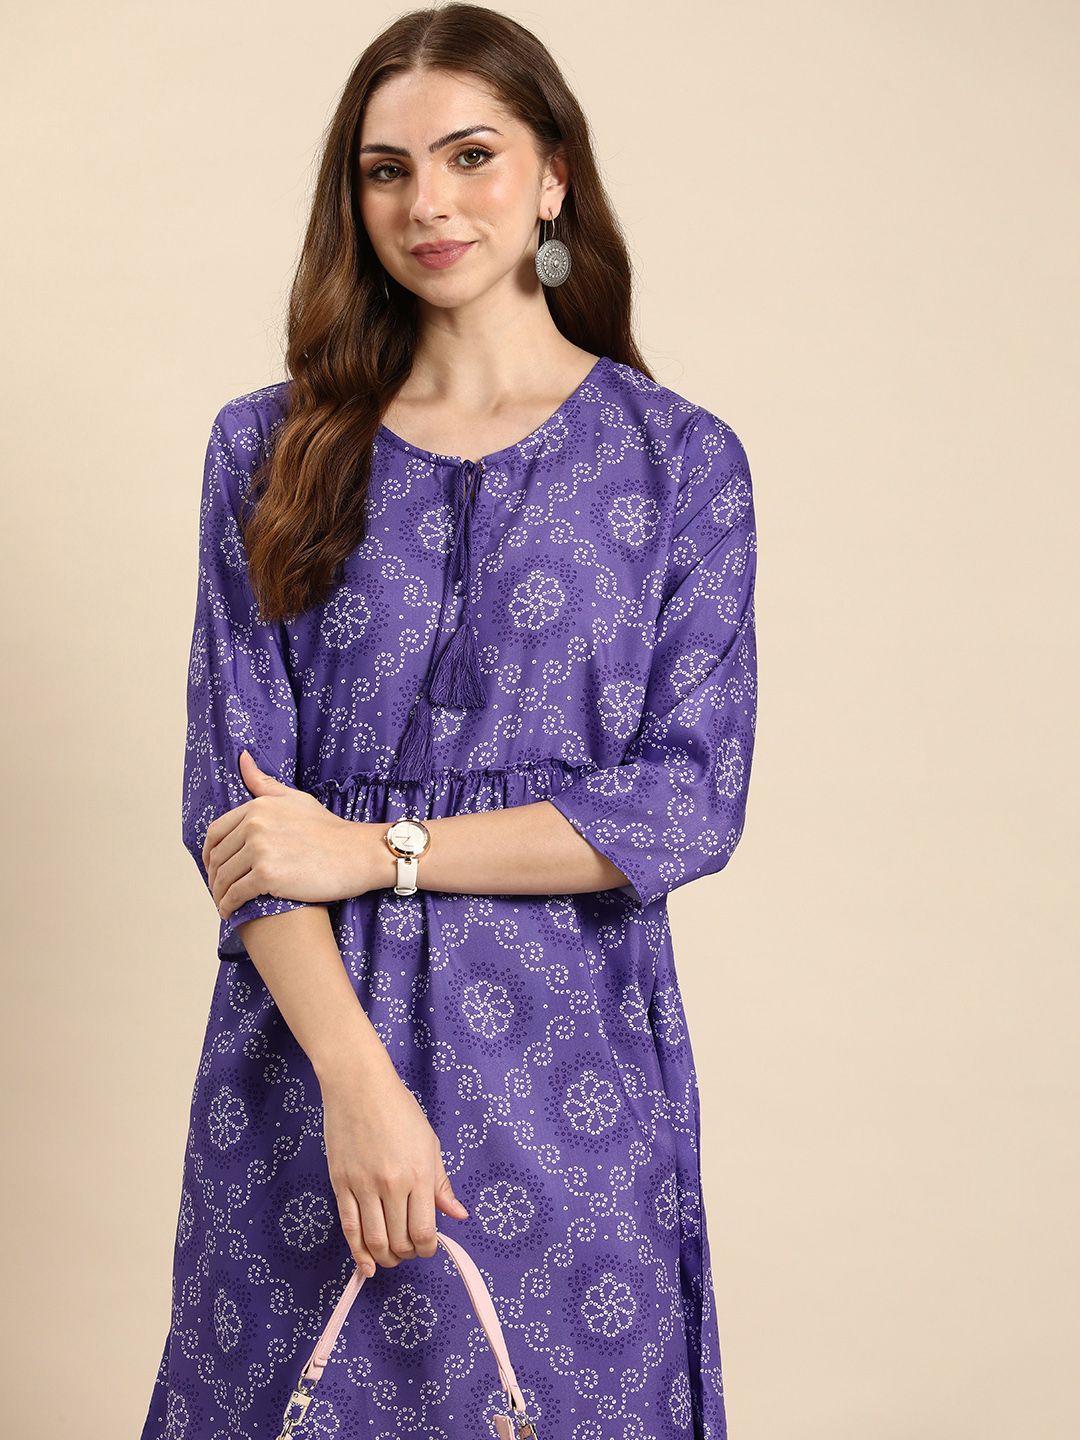 Anouk Ethnic Motifs Bandhani Printed Tie-Up Neck A-Line Dress Price in India